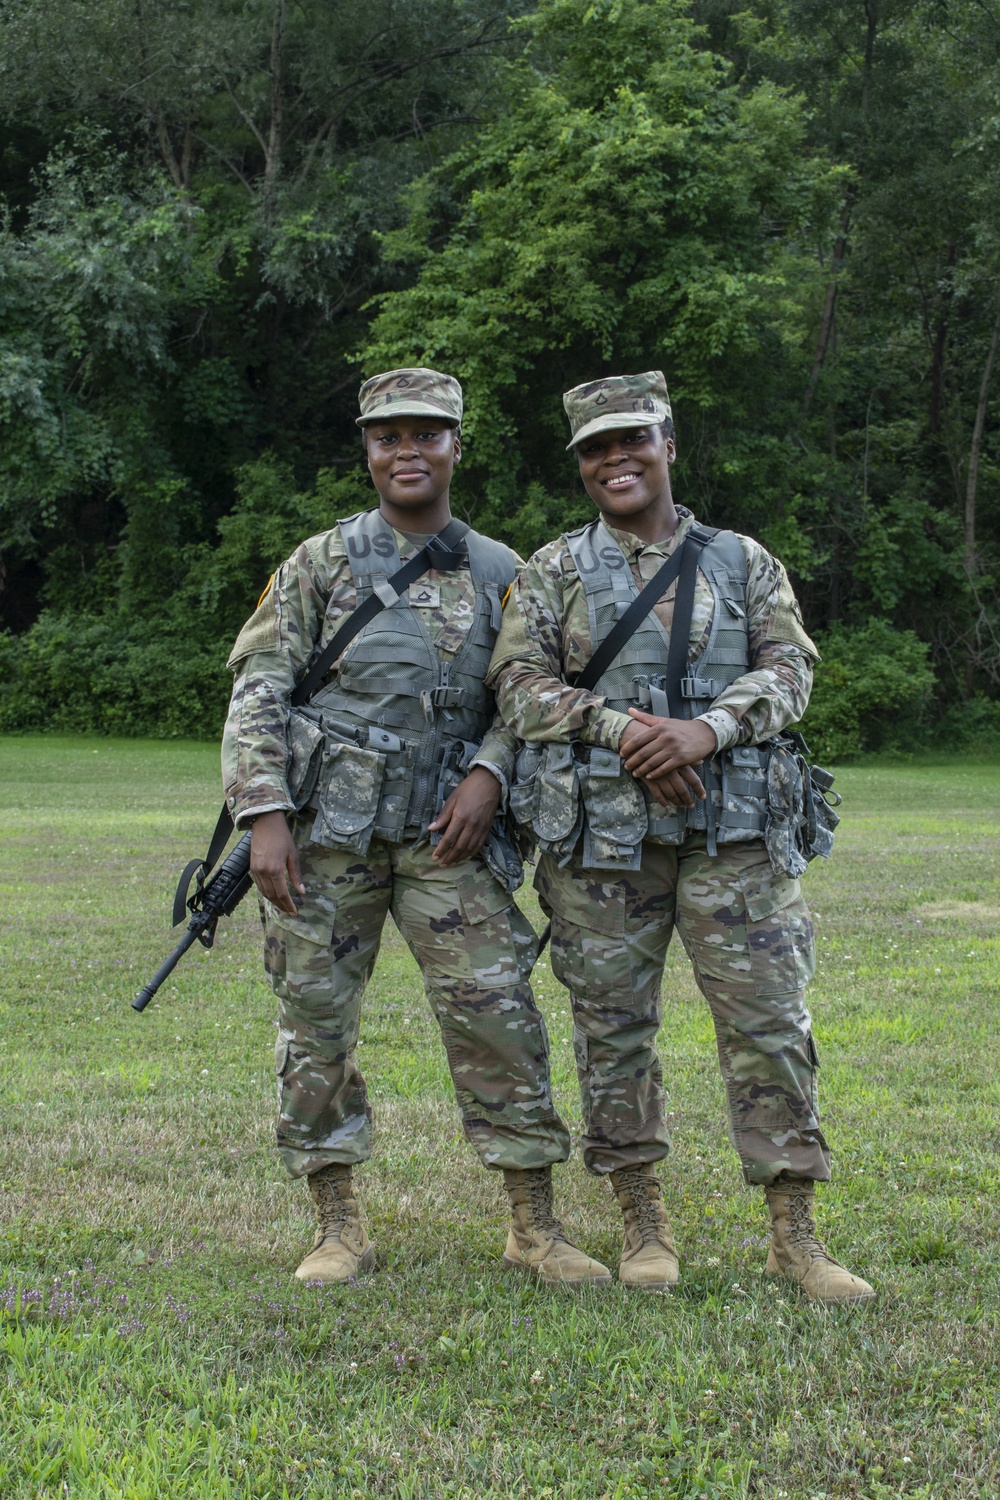 3-142 Soldiers conduct land navigation training